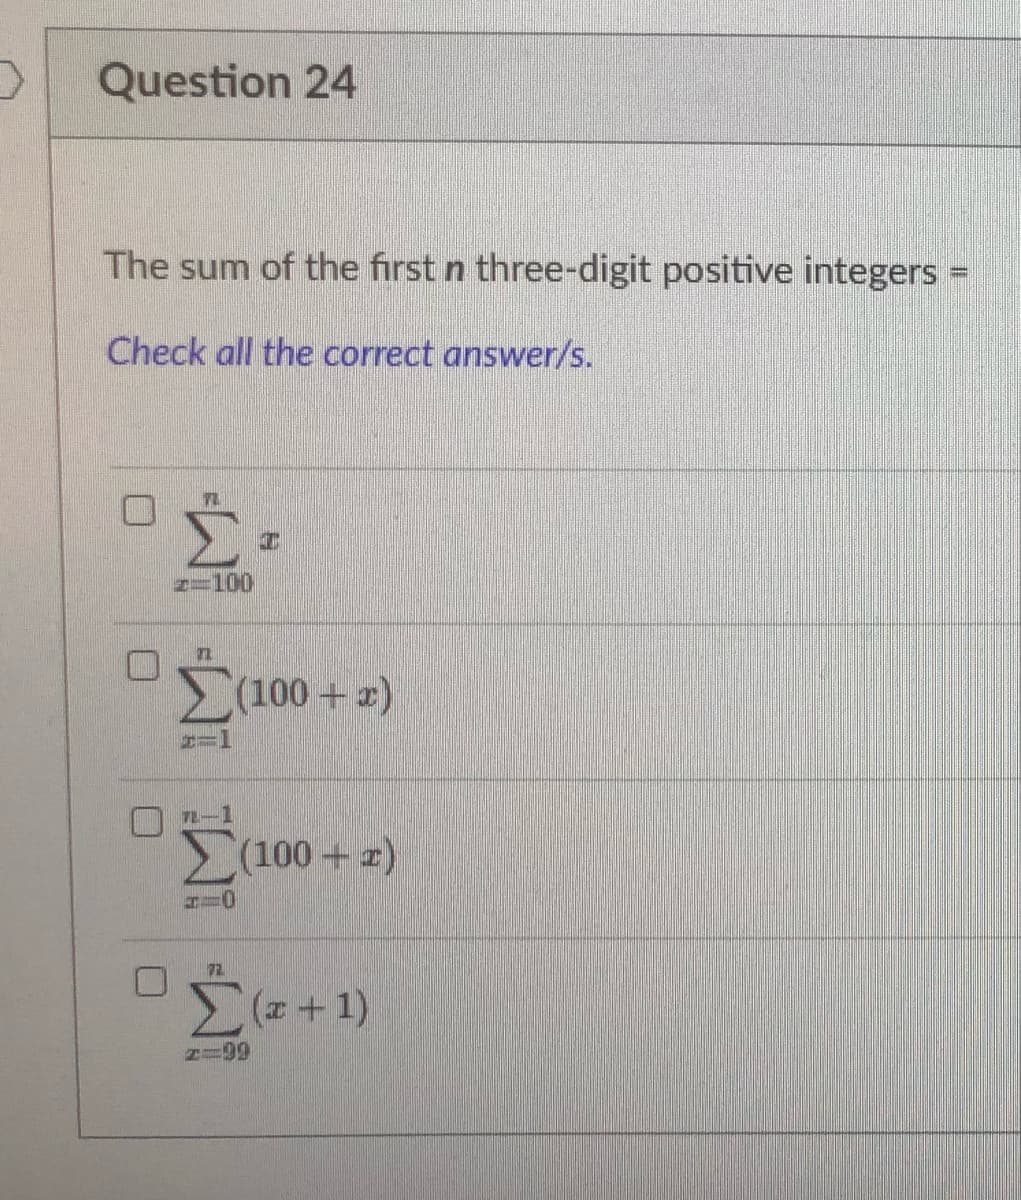 Question 24
The sum of the first n three-digit positive integers =
Check all the correct answer/s.
T
z=100
Σ(100 + 2)
2-1
(100 + 2)
0
0
#=0
Σ(²+1)
#=99